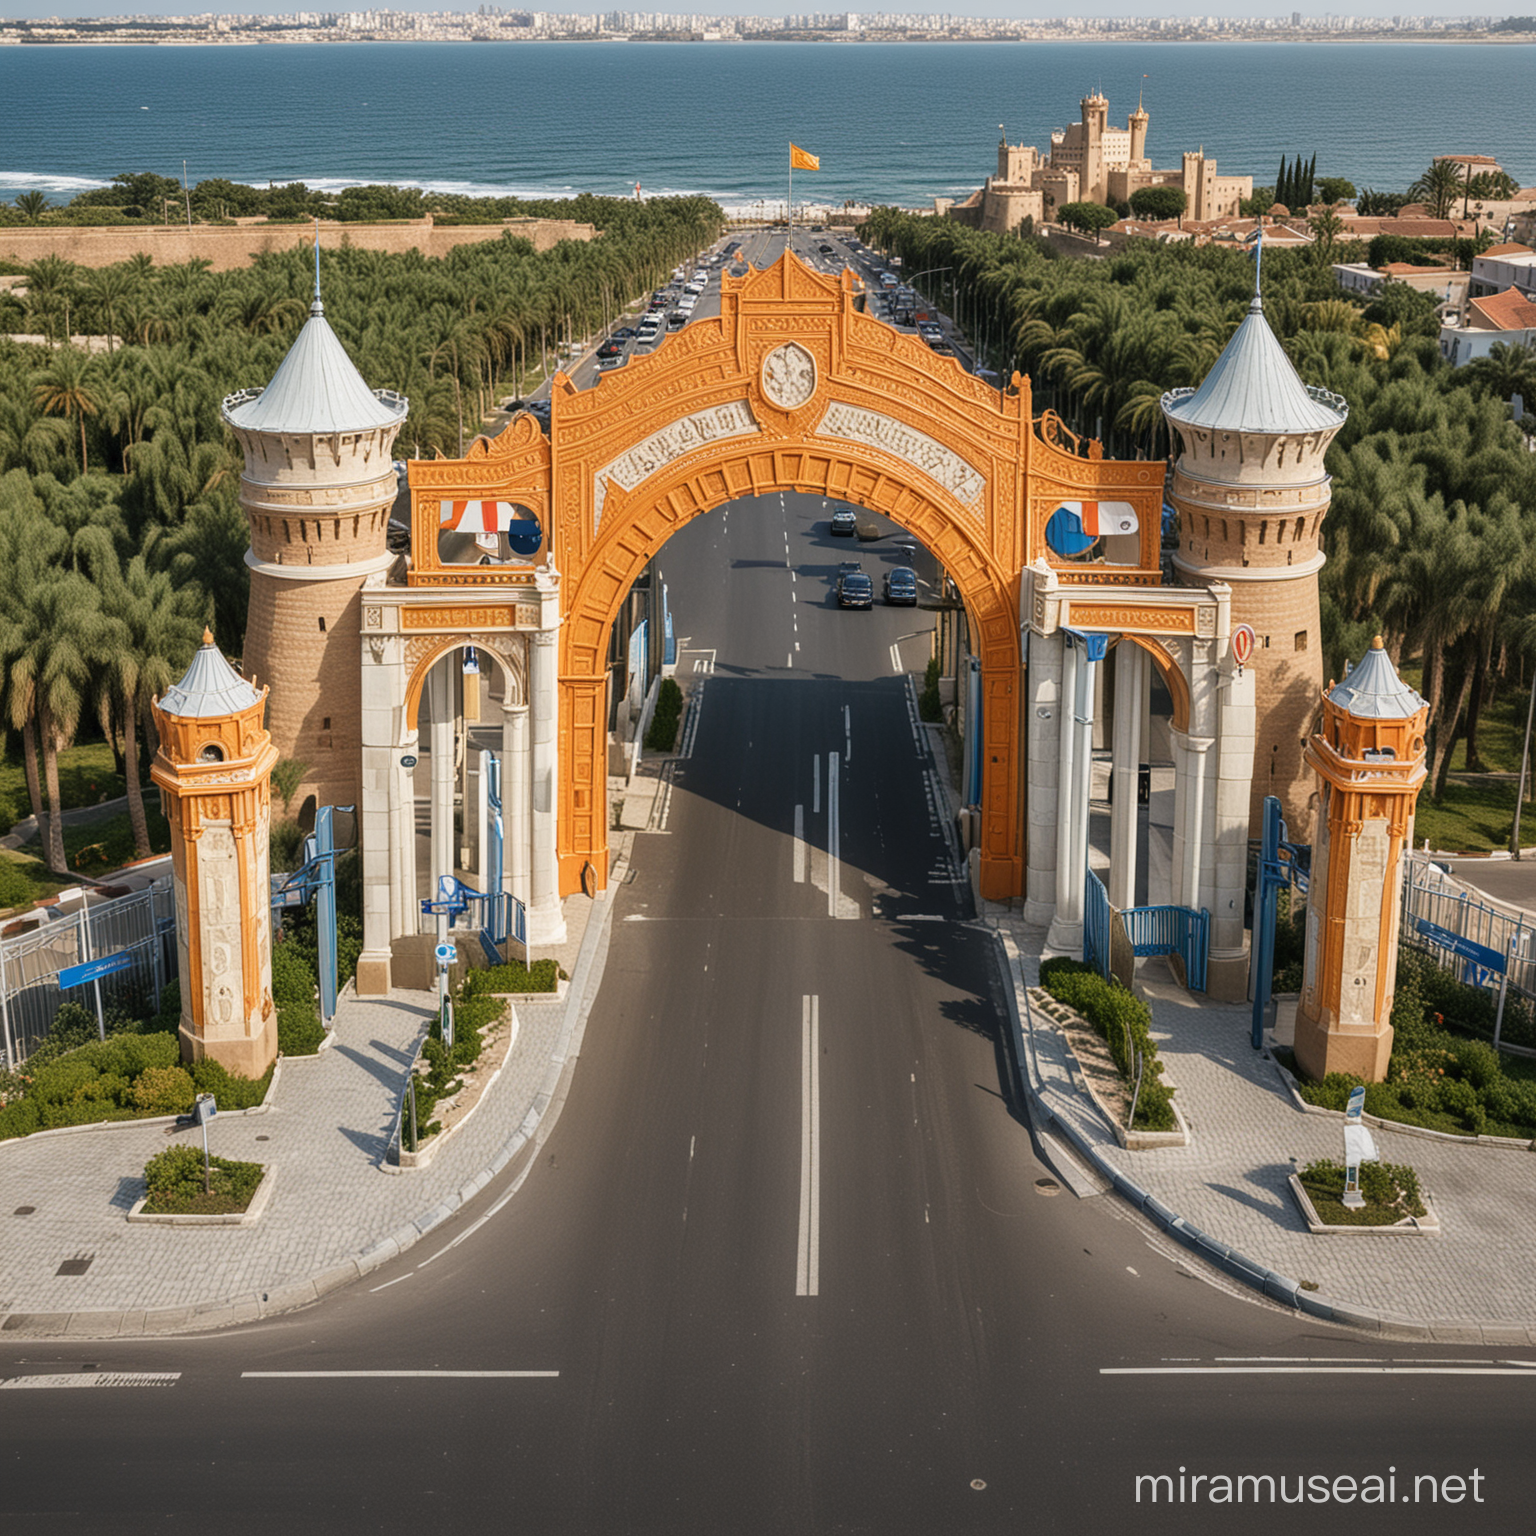 Governorate entrance to pay car tools divided into 3 gates and a toll booth. The design of the governorate entrance to pay car toll is inspired by the shape of sea water, crops, wheat stalks, the castle, and the shape of the shield, in the colors orange, white, blue, beige and yellow, with a distinctive design.